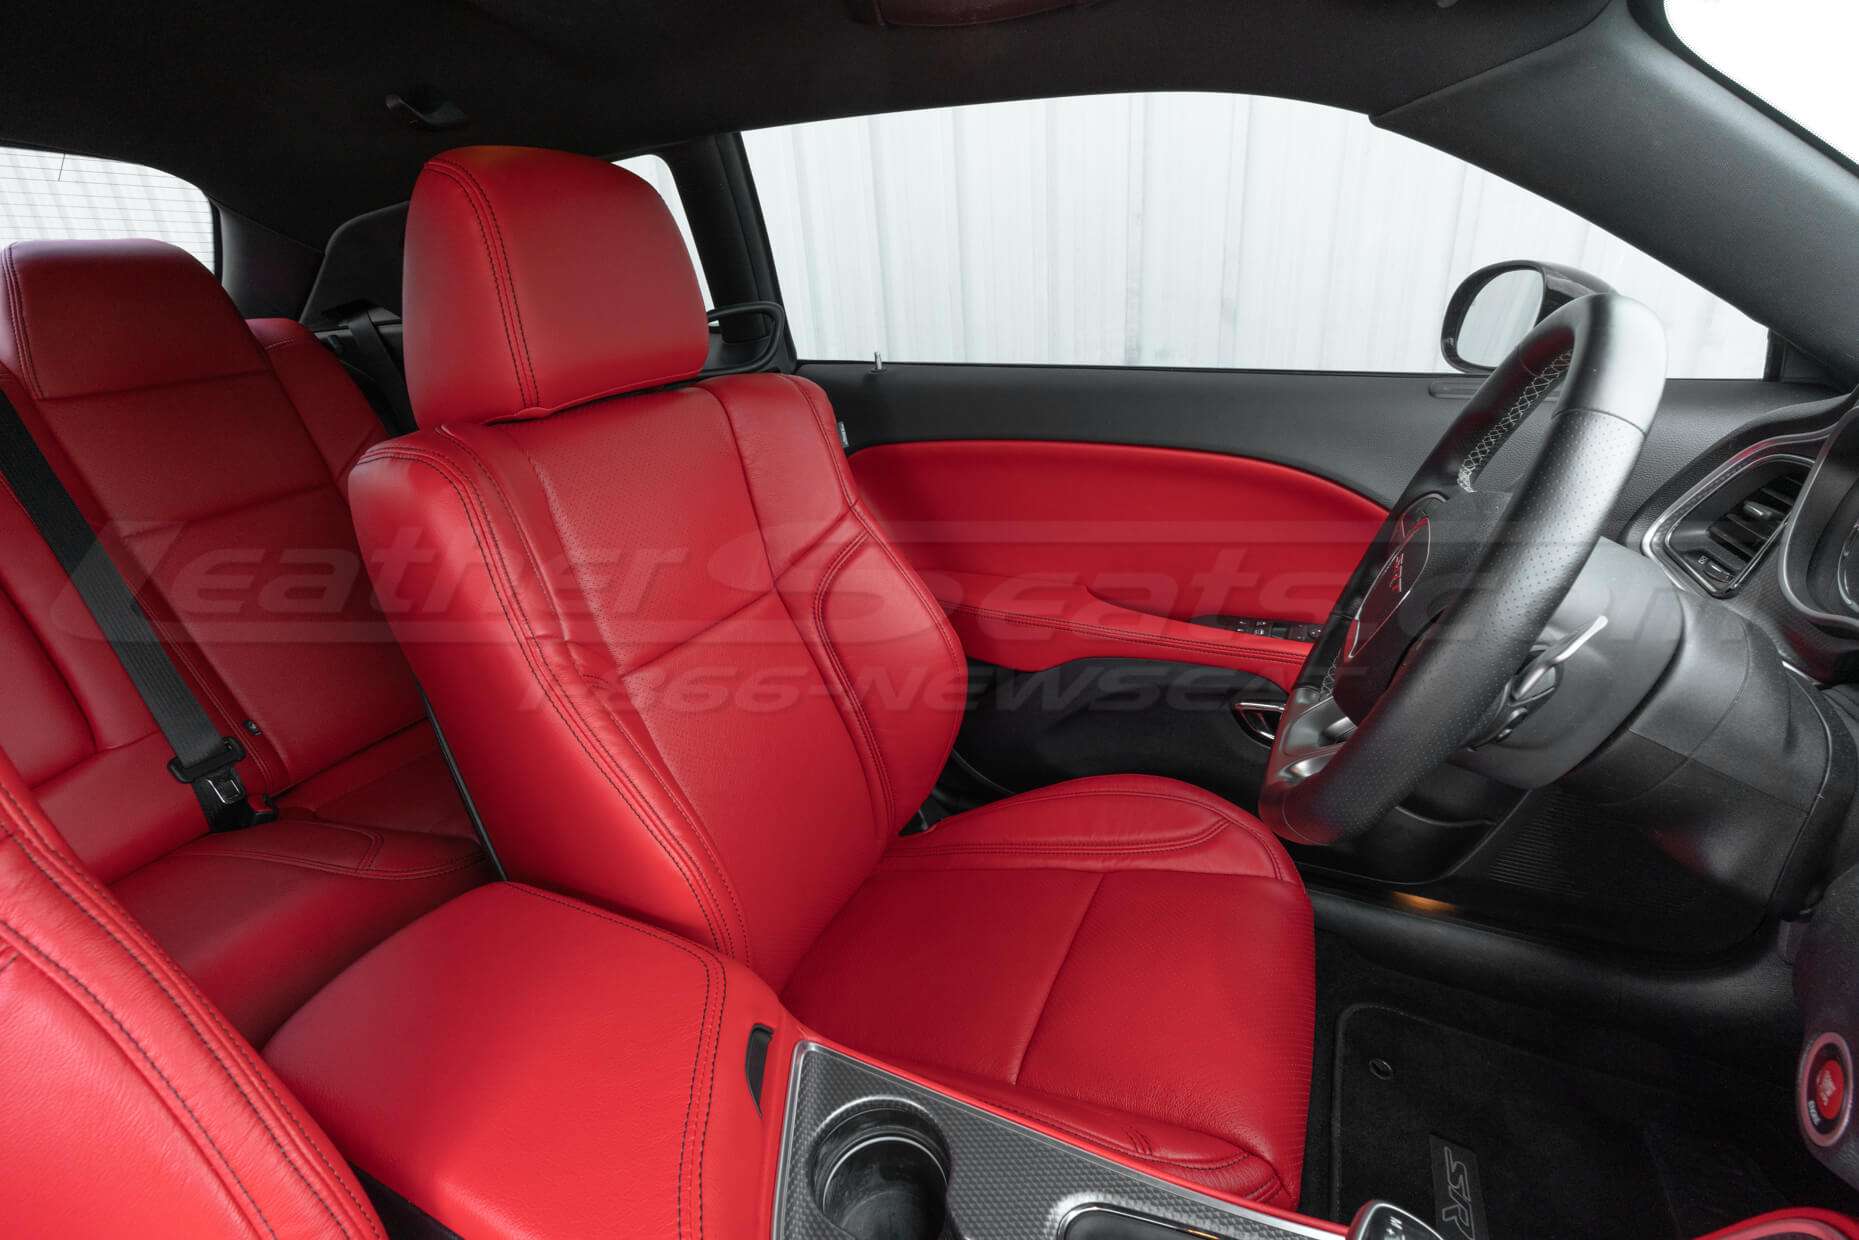 Bright Red Dodge Challenger Leather Seats - Drivers seat from passenger side view